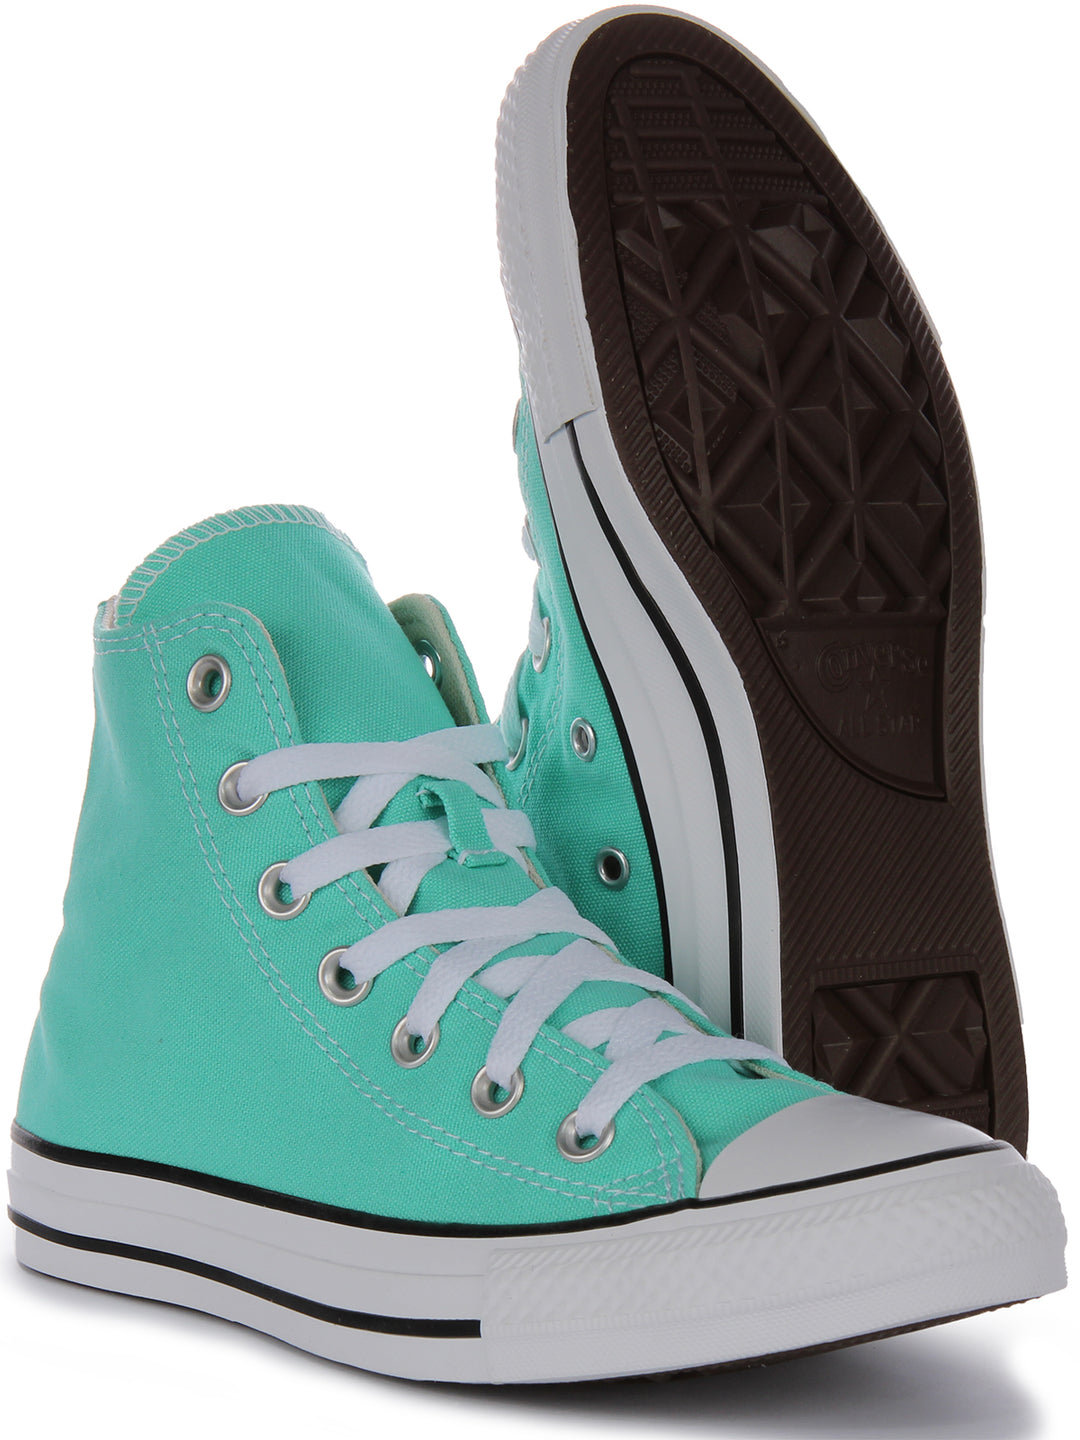 Converse All Star High A03796C In Teal